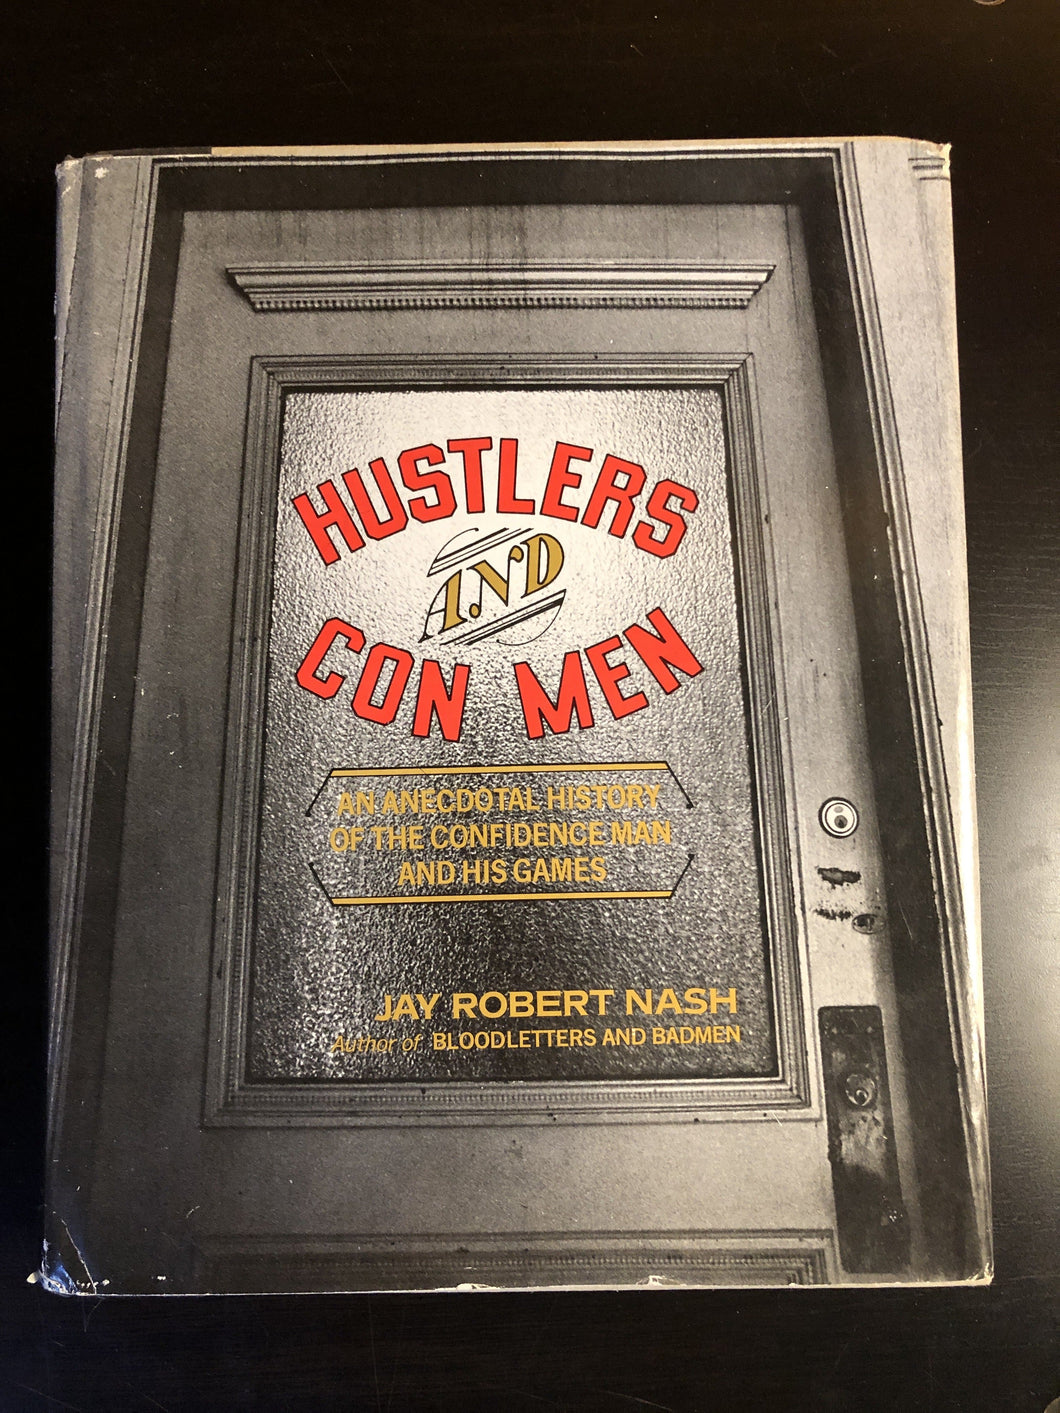 Hustlers & Con Men: An Anecdotal History of the Confidence Man and His Games